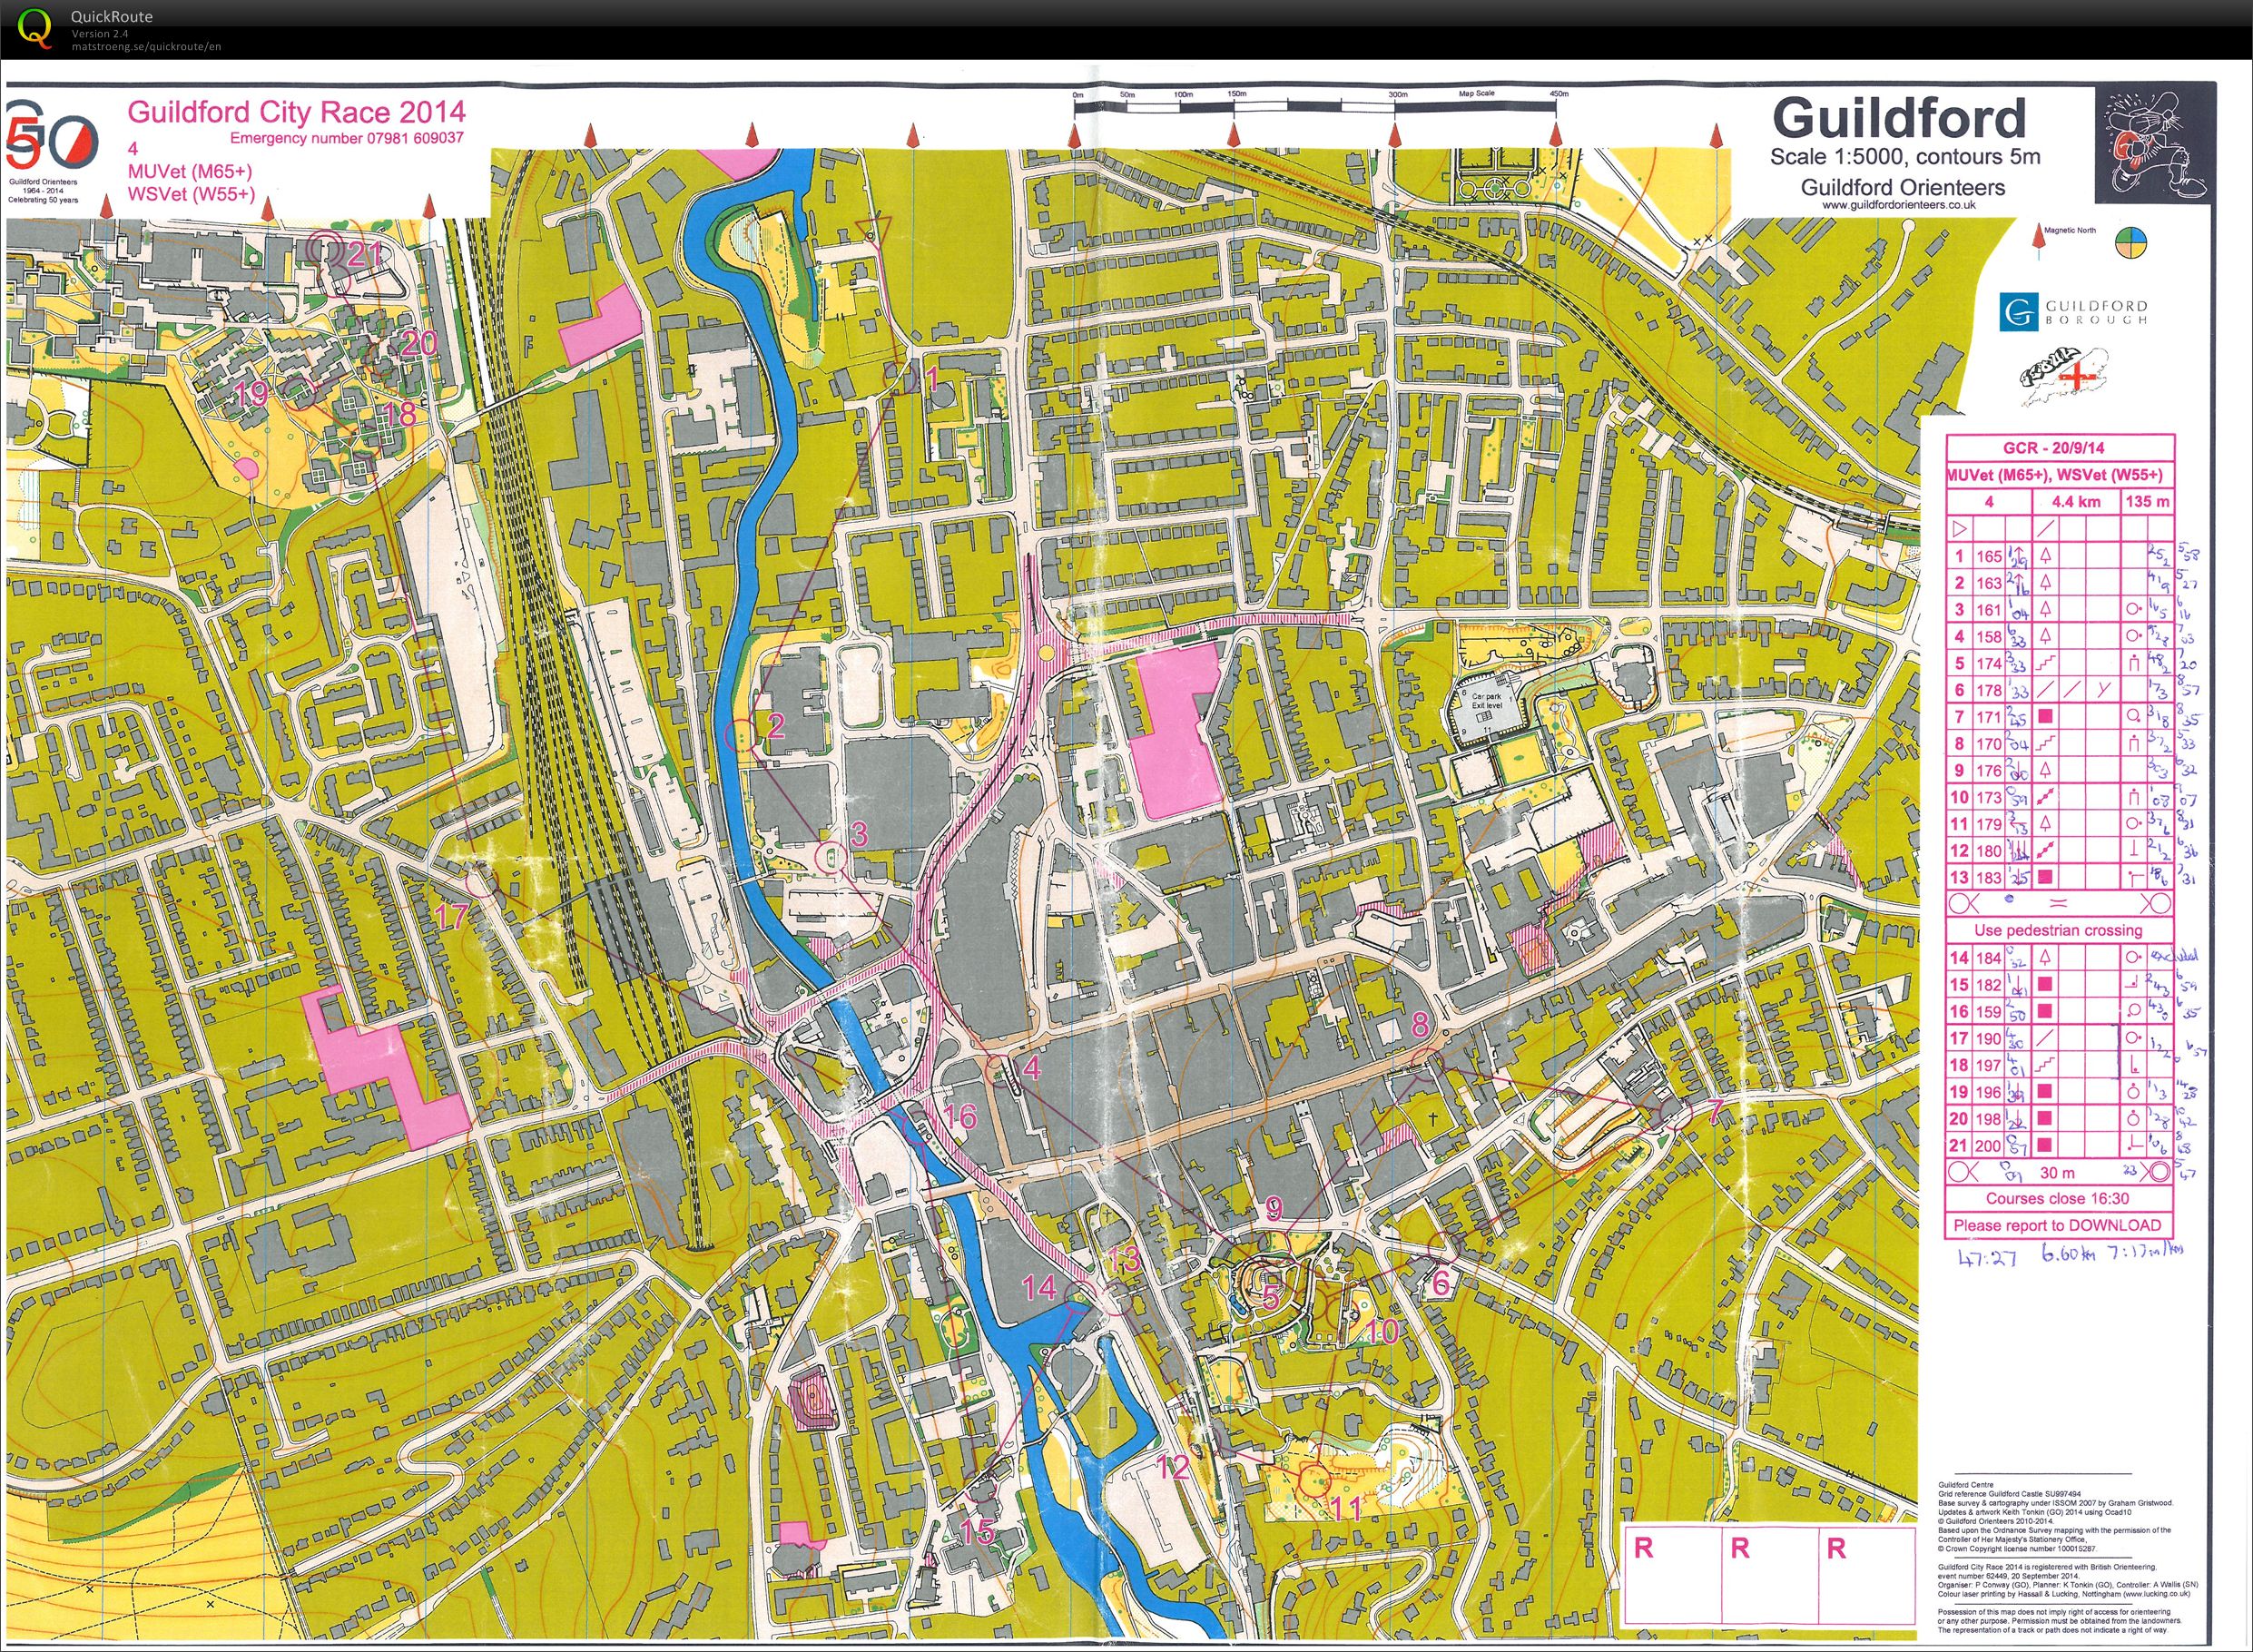 Guildford Urban Race (20-09-2014)